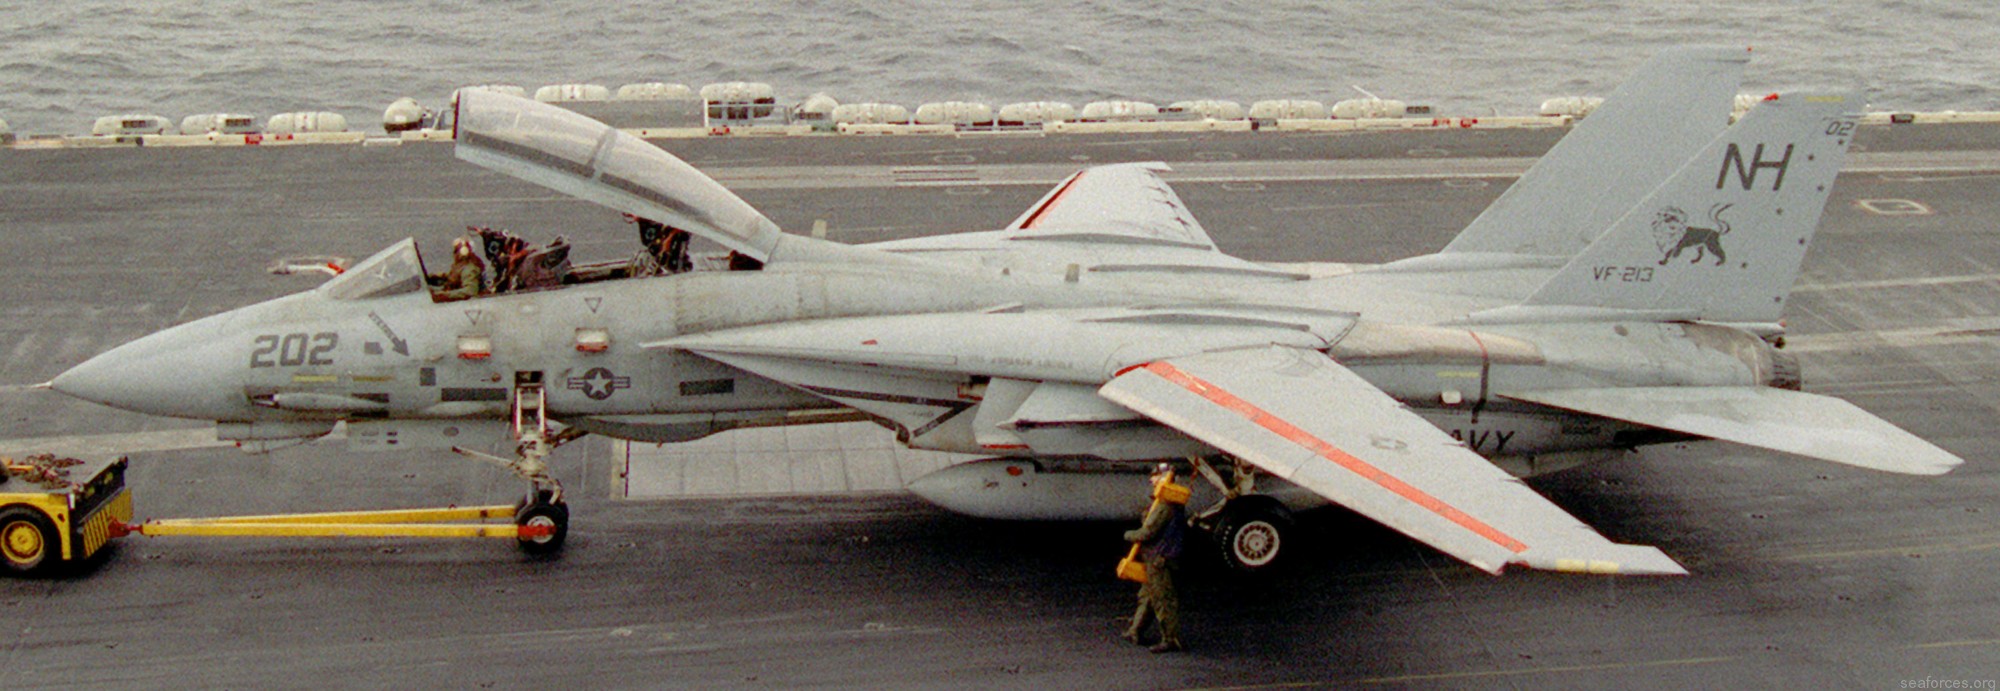 vf-213 black lions fighter squadron us navy f-14a tomcat carrier air wing cvw-11 uss abraham lincoln cvn-72 74